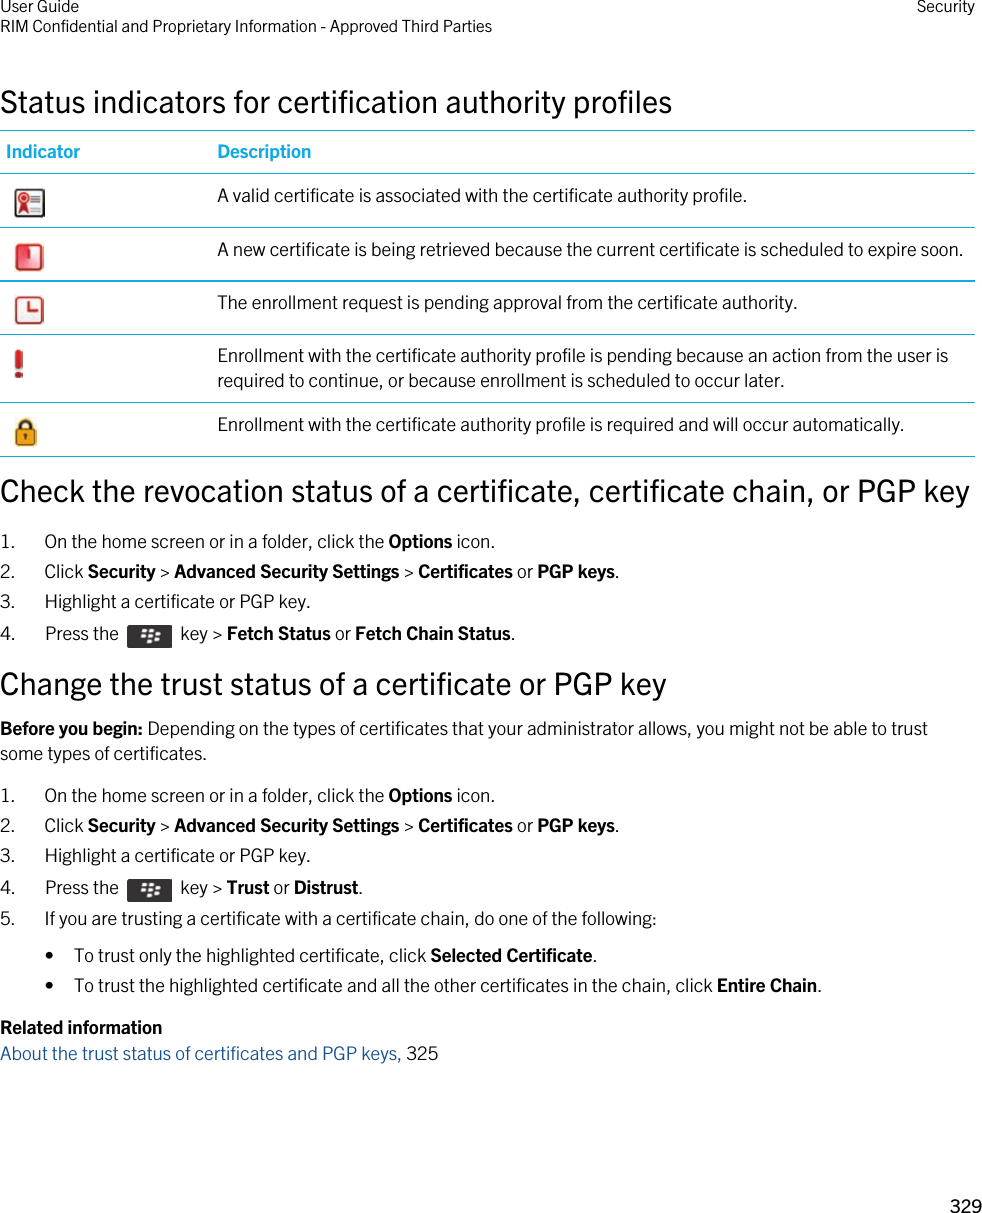 Status indicators for certification authority profilesIndicator Description A valid certificate is associated with the certificate authority profile. A new certificate is being retrieved because the current certificate is scheduled to expire soon. The enrollment request is pending approval from the certificate authority. Enrollment with the certificate authority profile is pending because an action from the user is required to continue, or because enrollment is scheduled to occur later. Enrollment with the certificate authority profile is required and will occur automatically.Check the revocation status of a certificate, certificate chain, or PGP key1. On the home screen or in a folder, click the Options icon.2. Click Security &gt; Advanced Security Settings &gt; Certificates or PGP keys.3. Highlight a certificate or PGP key.4.  Press the    key &gt; Fetch Status or Fetch Chain Status. Change the trust status of a certificate or PGP keyBefore you begin: Depending on the types of certificates that your administrator allows, you might not be able to trust some types of certificates.1. On the home screen or in a folder, click the Options icon.2. Click Security &gt; Advanced Security Settings &gt; Certificates or PGP keys.3. Highlight a certificate or PGP key.4.  Press the    key &gt; Trust or Distrust. 5. If you are trusting a certificate with a certificate chain, do one of the following:• To trust only the highlighted certificate, click Selected Certificate.• To trust the highlighted certificate and all the other certificates in the chain, click Entire Chain.Related informationAbout the trust status of certificates and PGP keys, 325 User GuideRIM Confidential and Proprietary Information - Approved Third Parties Security329 